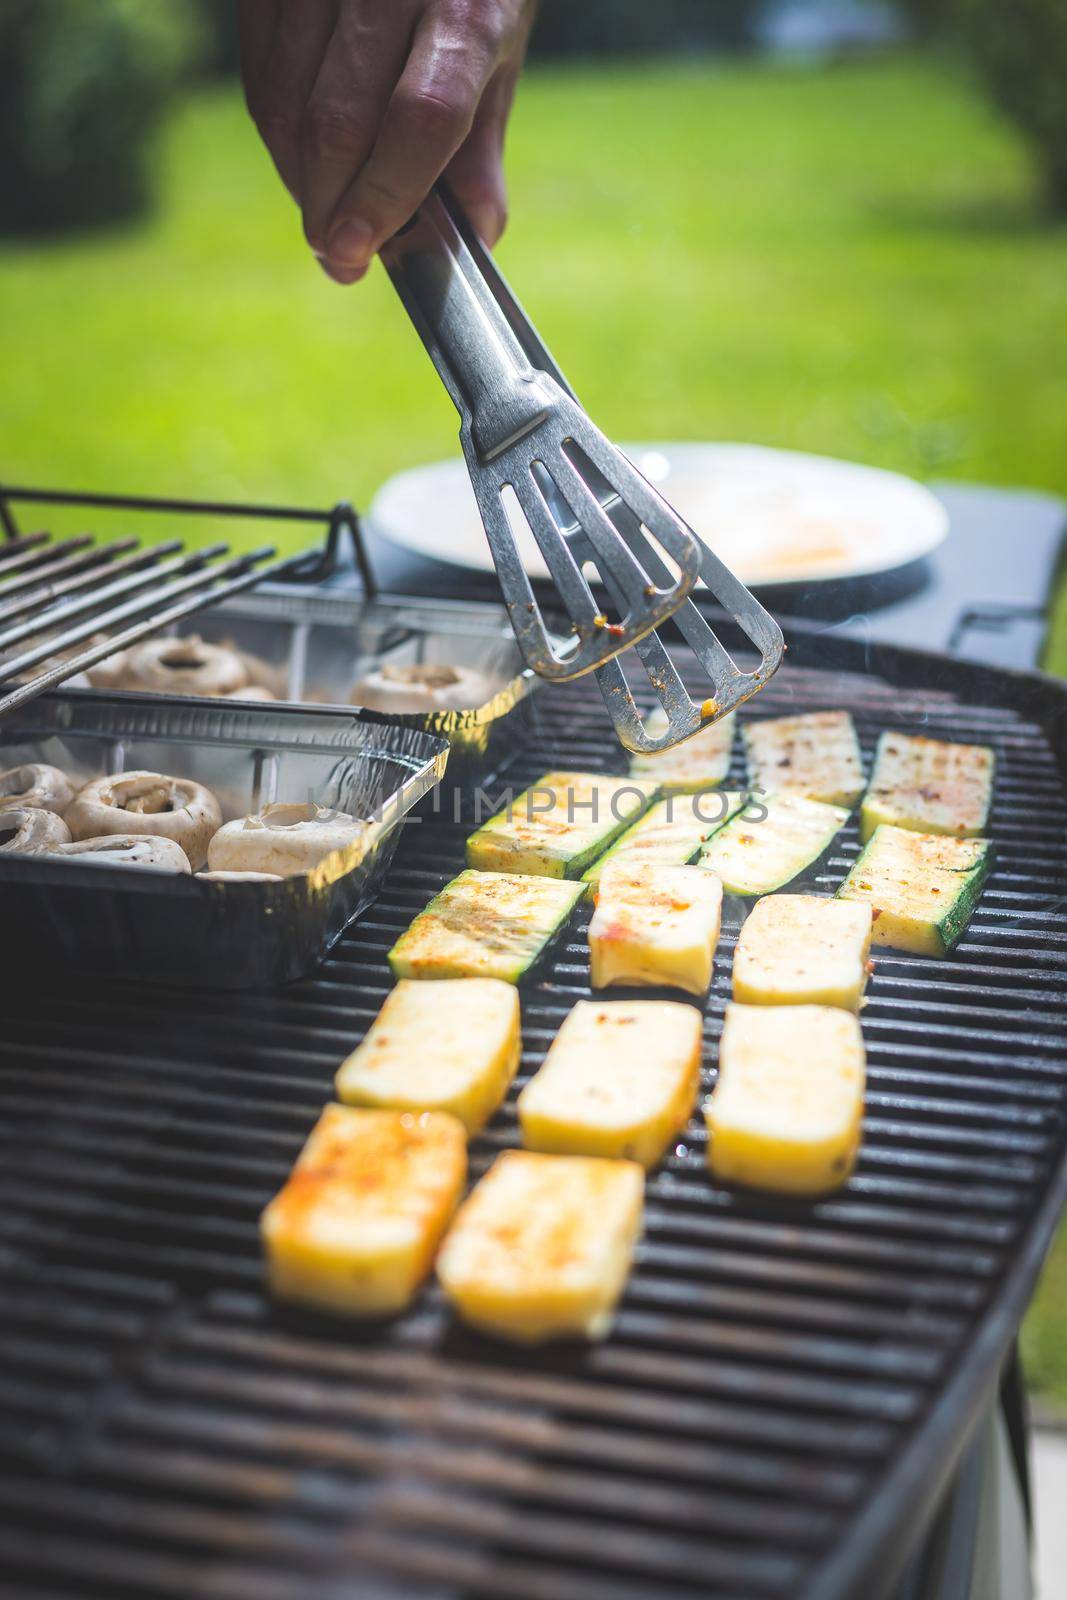 BBQ on weekend. Grill cheese and vegetables on gas grill. Outdoors. by Daxenbichler